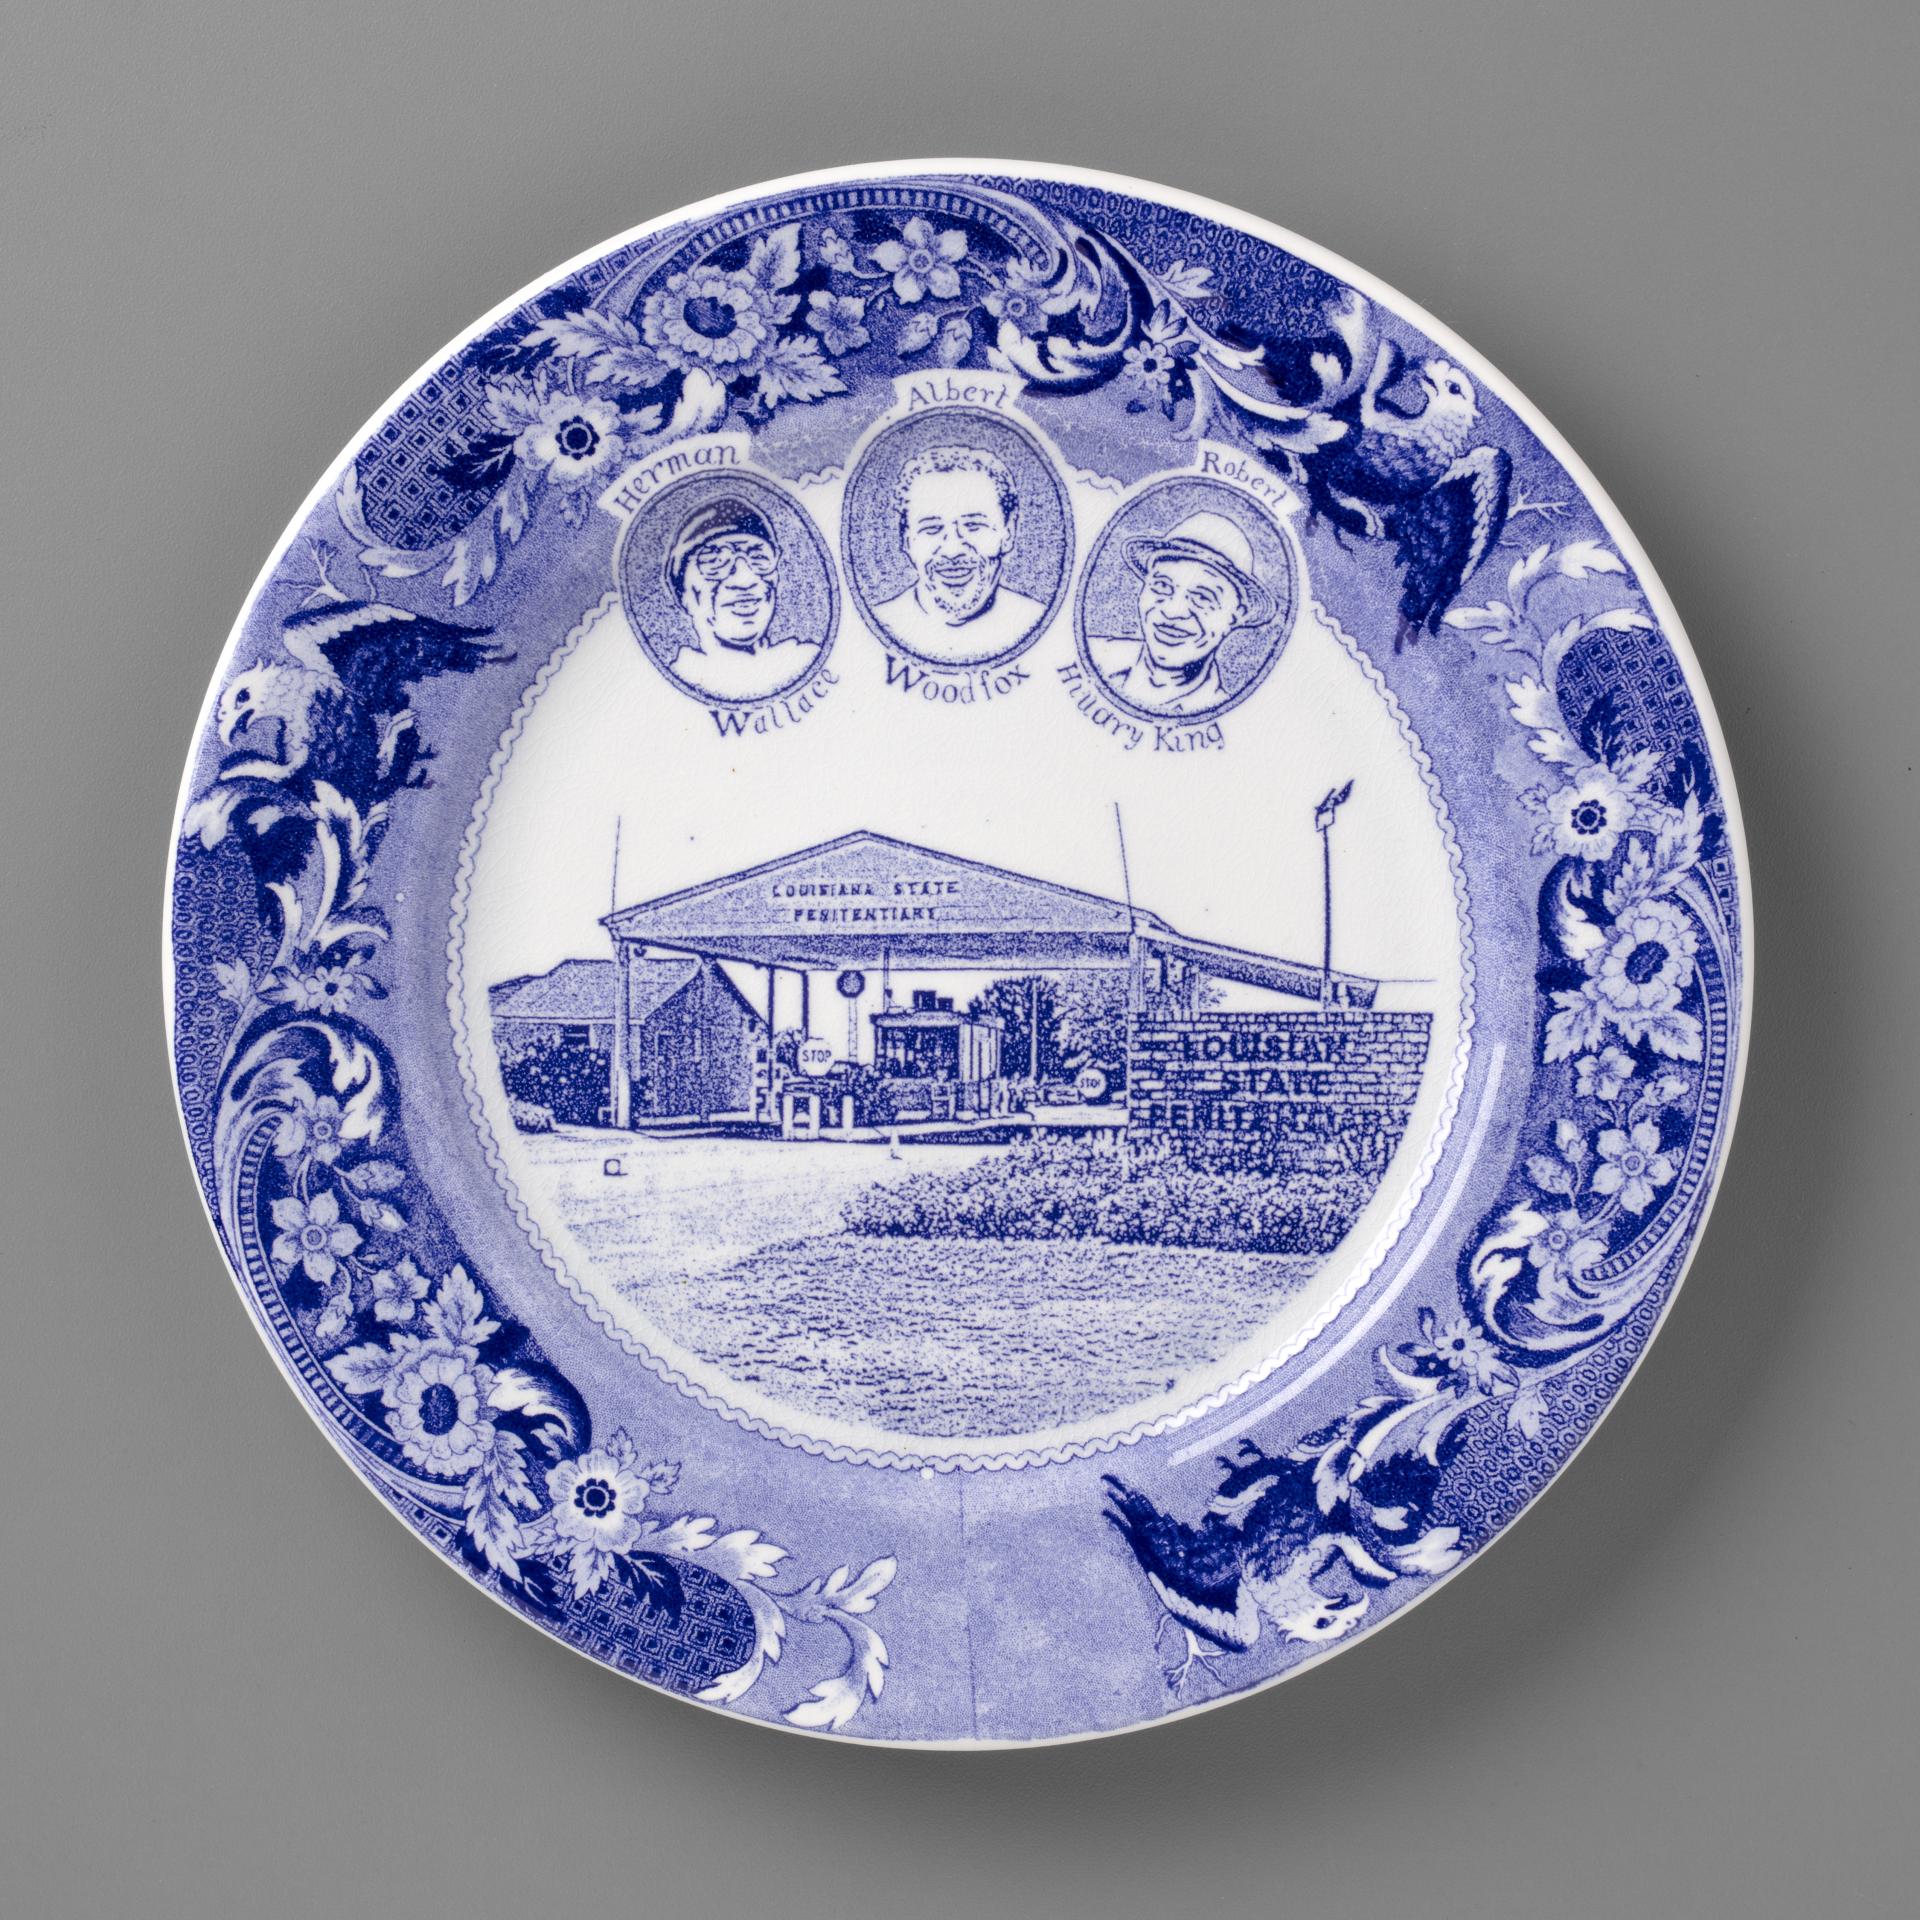 blue and white transferware plate depicting the Angola 3, and the Louisiana State Penitentary